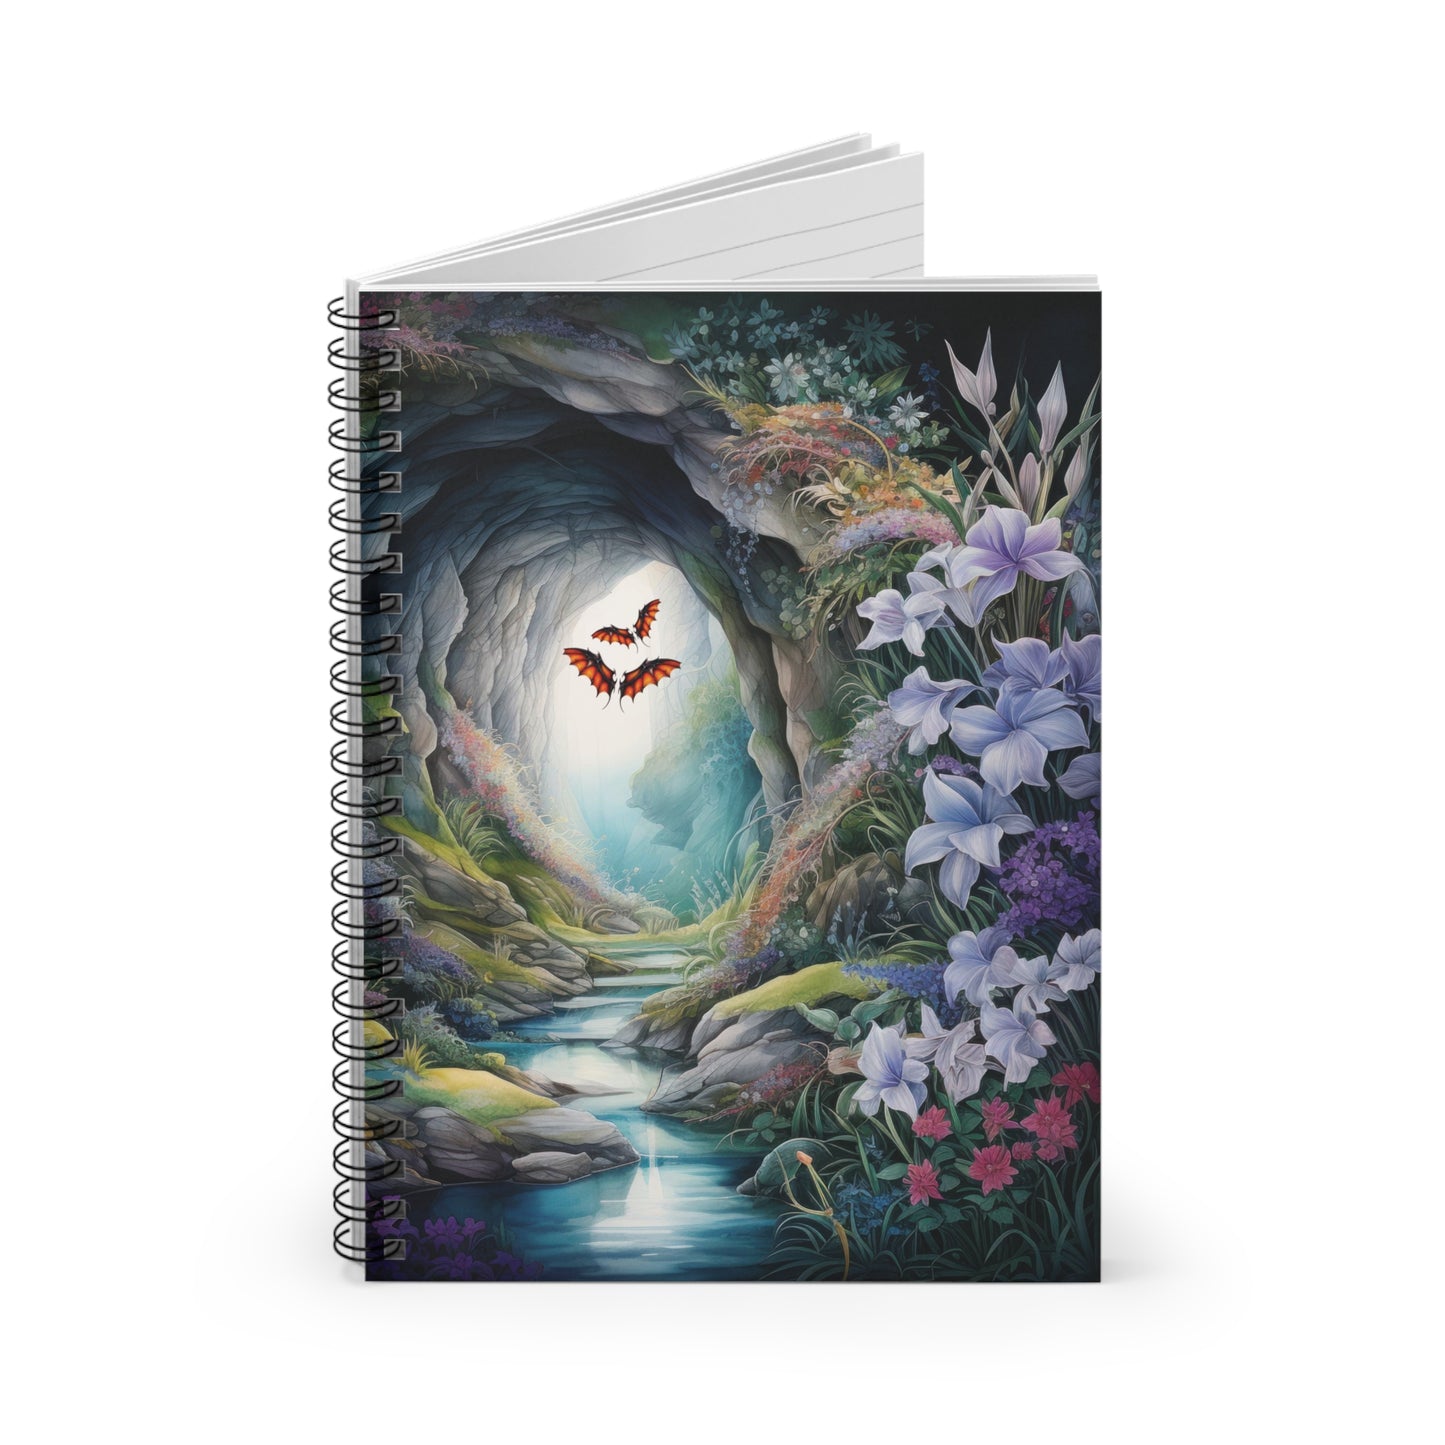 Blue Soul Cave Spiral Notebook - Ruled Line - Perfect Gift - Soul Seeking - Deep Self - Reflection